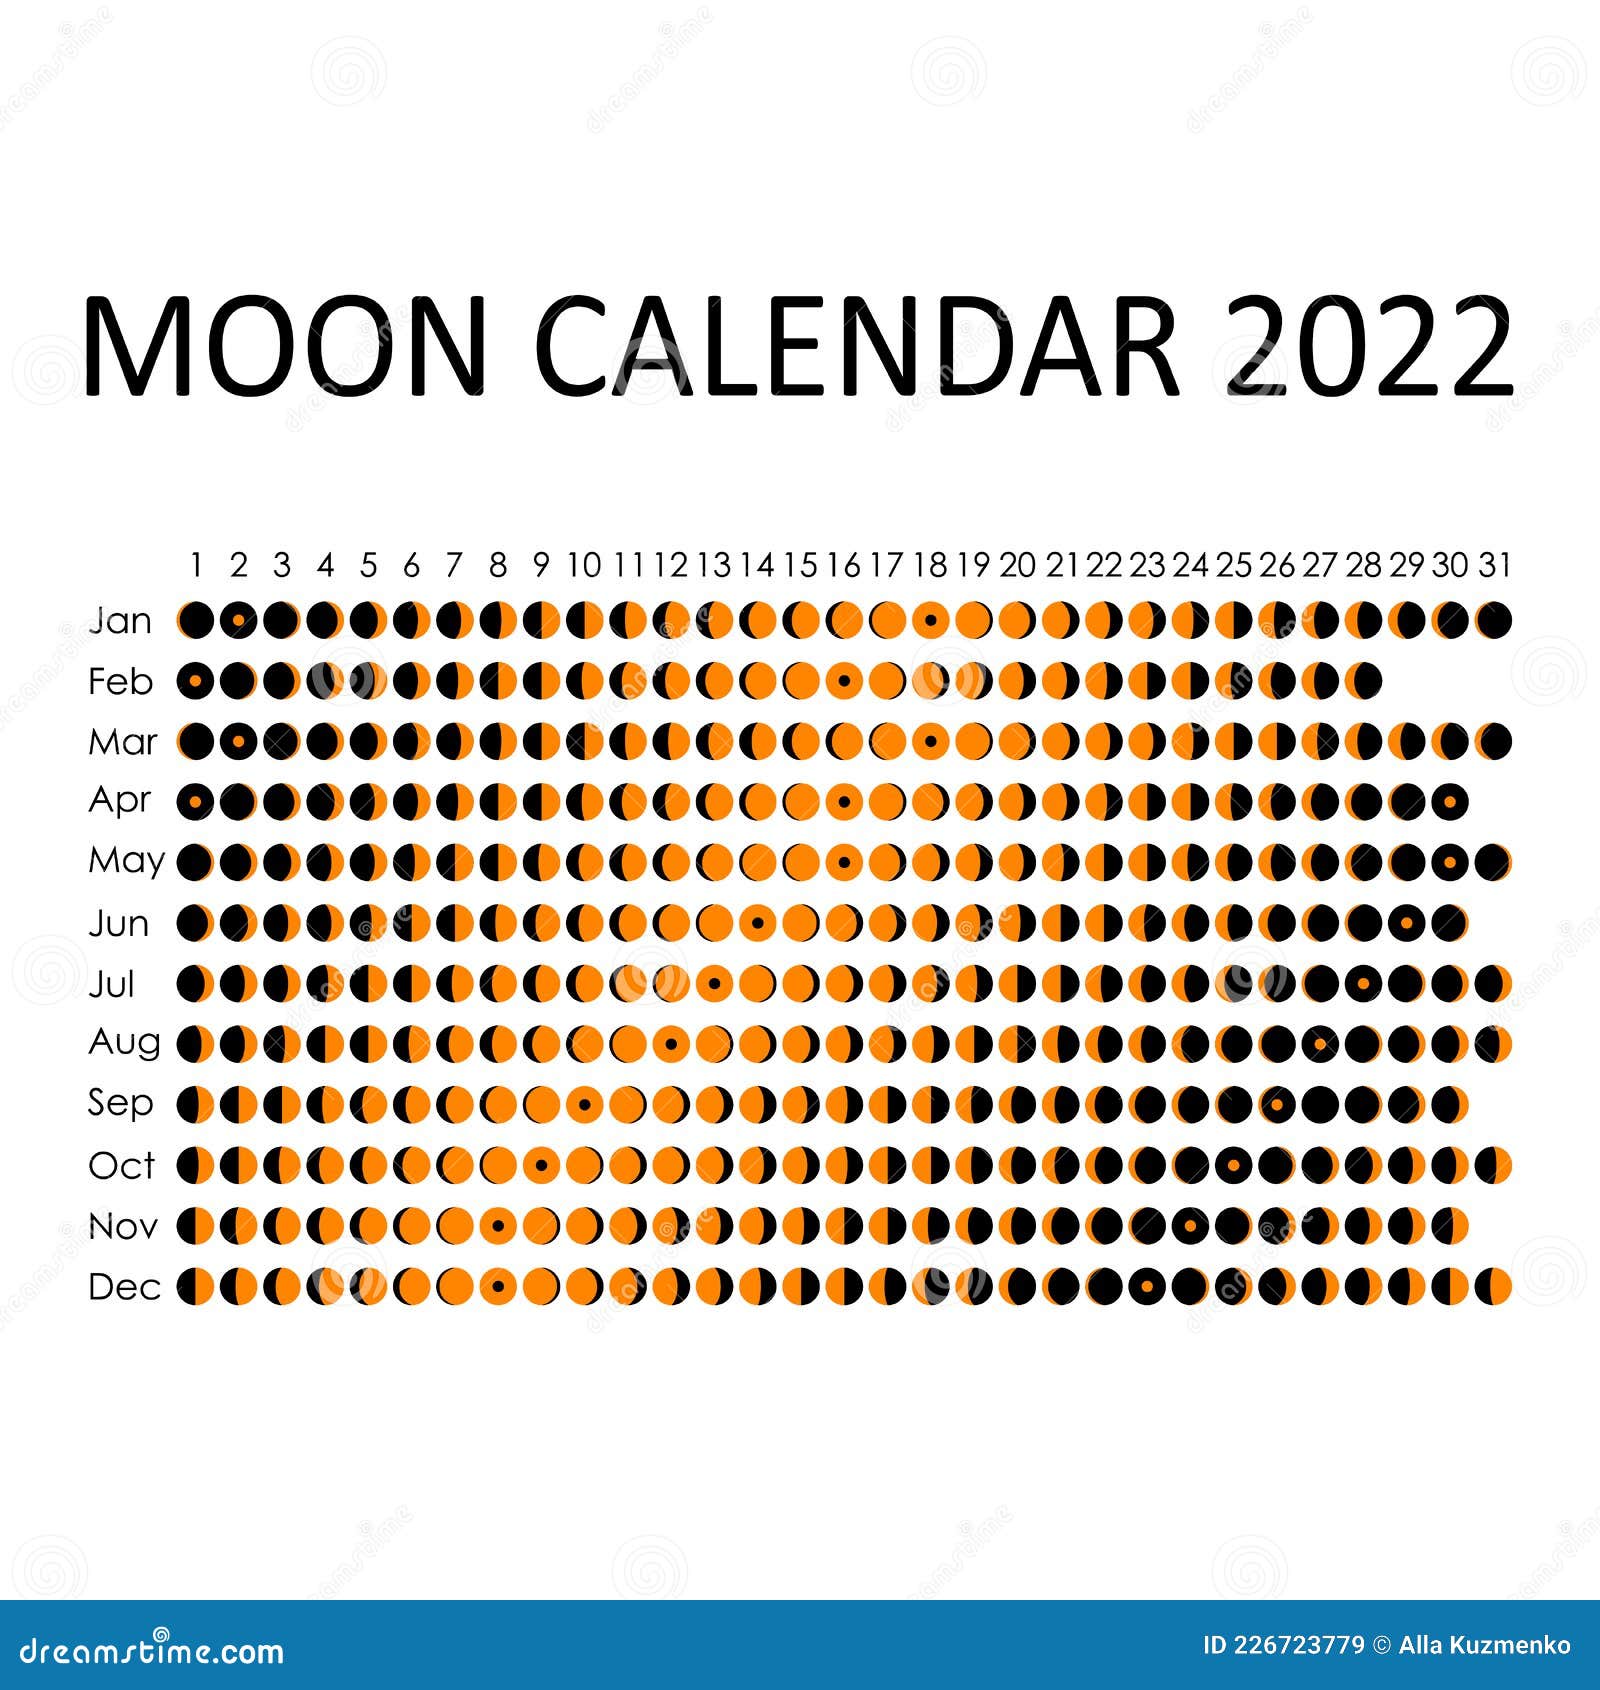 2022 Moon Calendar Astrological Calendar Design Planner Place For Stickers Month Cycle Planner Mockup Isolated Stock Vector Illustration Of Cosmic Eclipse 226723779